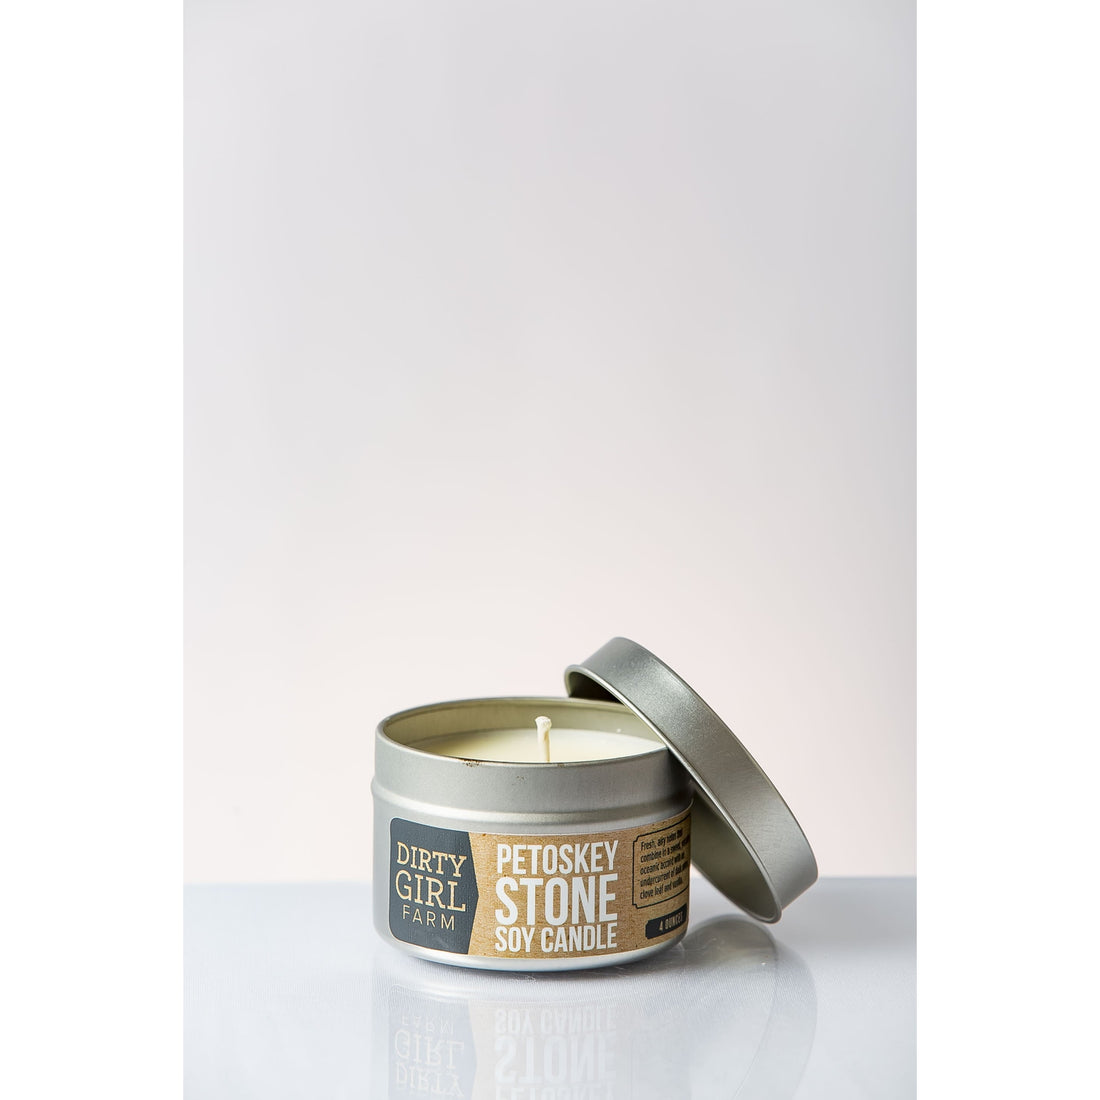 Petosky Stone Soy Candle